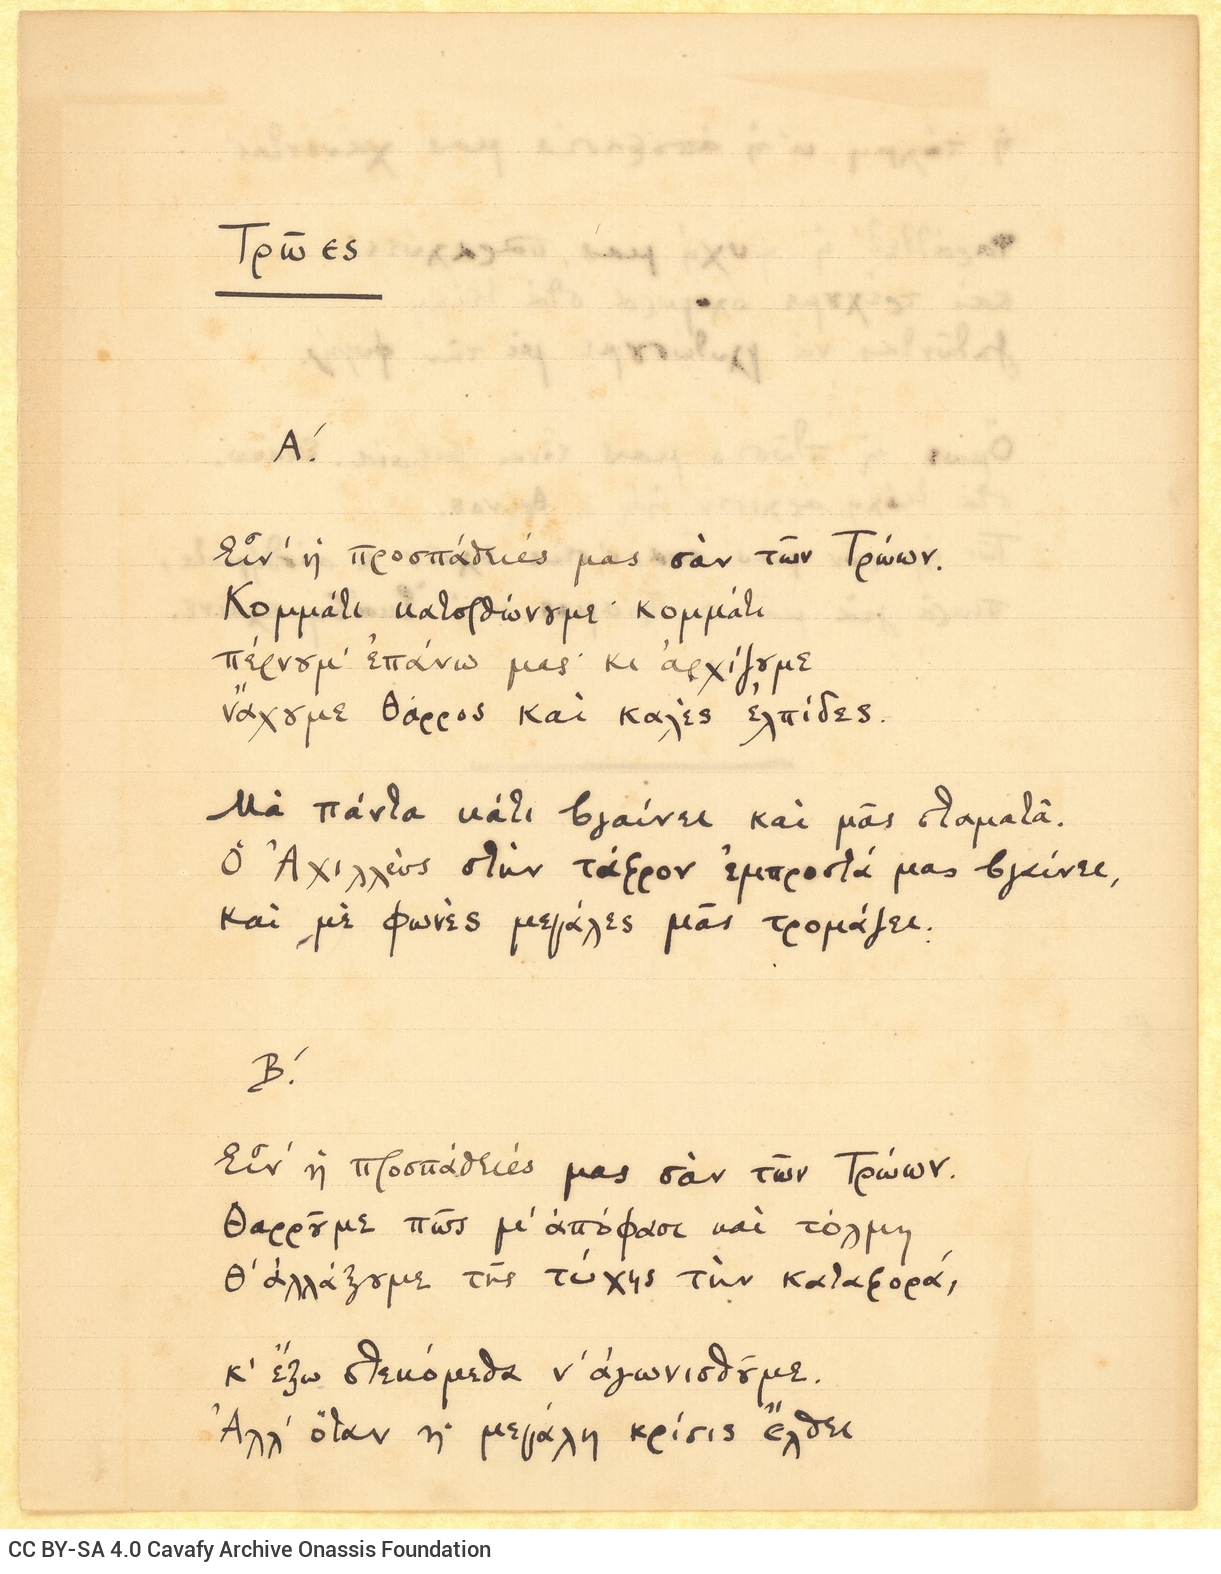 Manuscript of the poem "Trojans" on both sides of a ruled sheet.